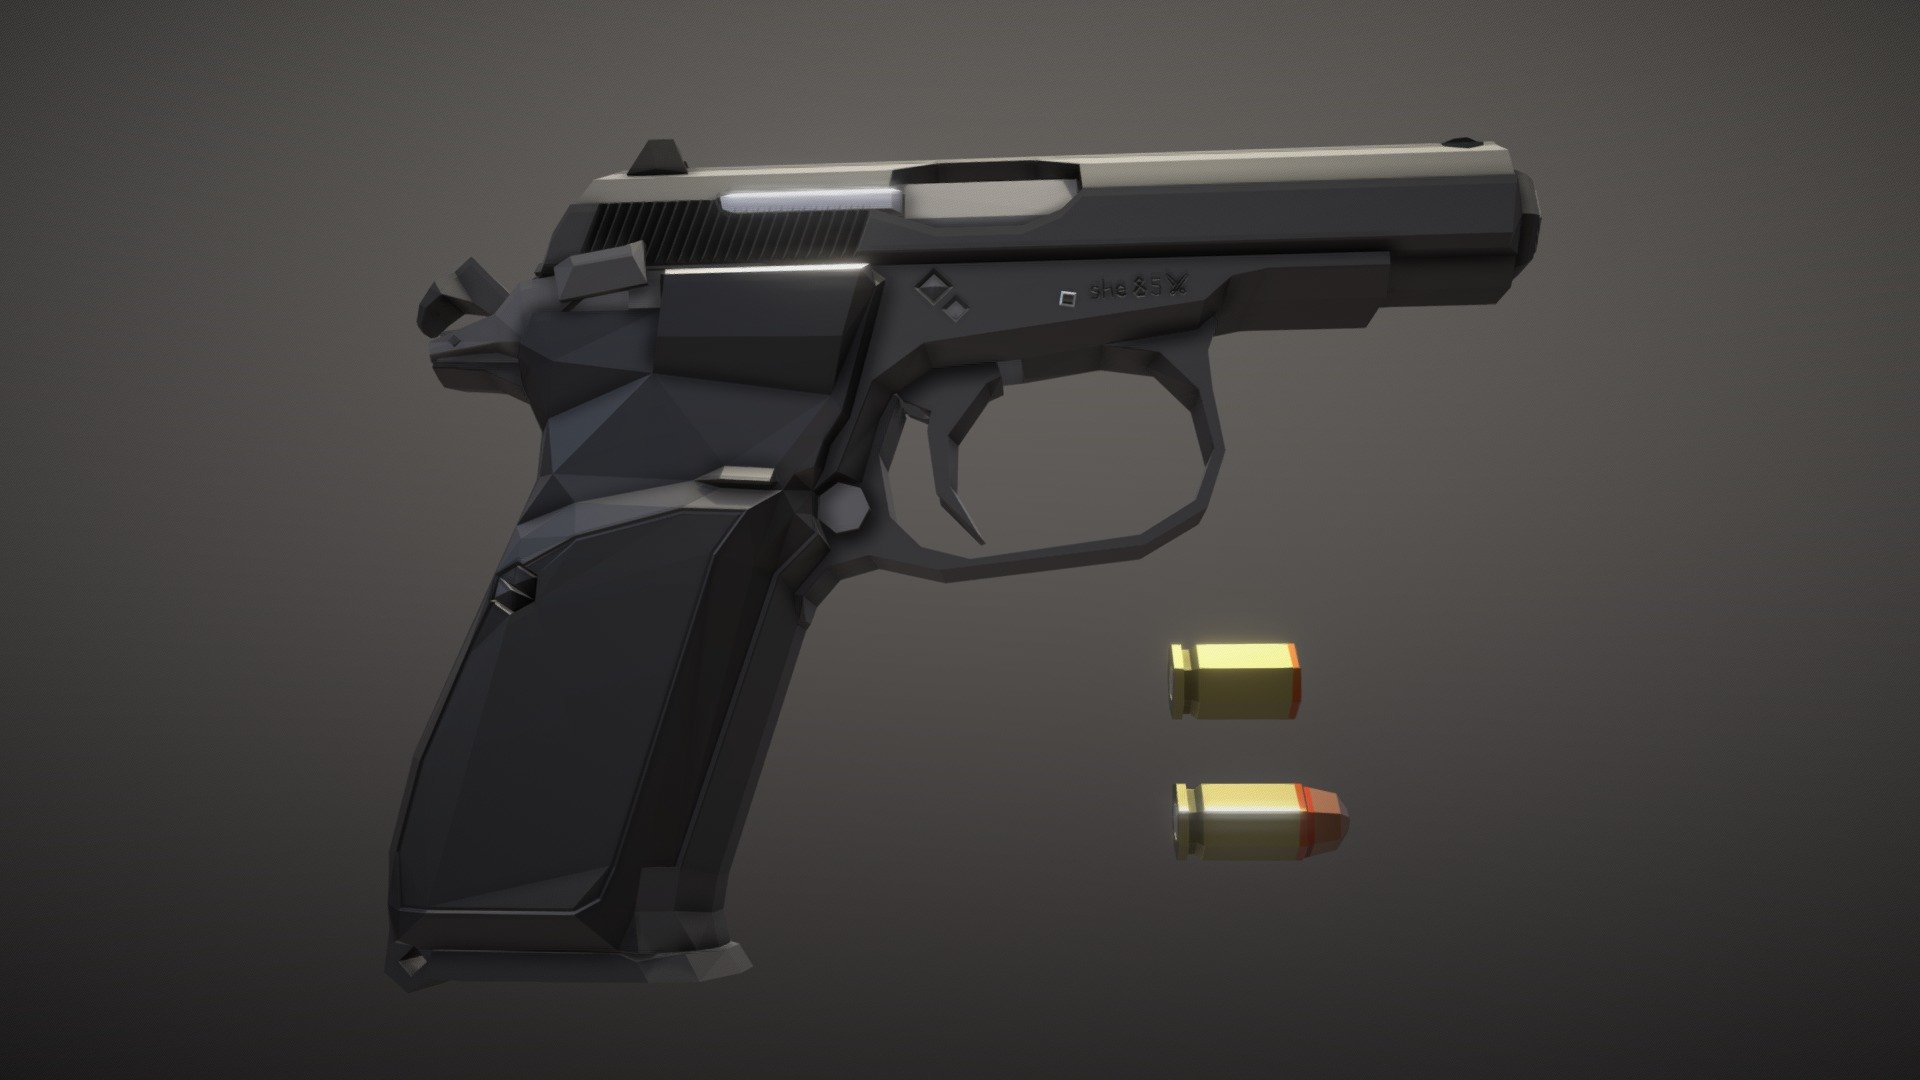 Low-Poly model of the CZ Vzor 82, a czech handgun chambered in 9x18 makarov.

This gun has a 12 round magazine, slide release, ambidextrous safety, ambidextrous mag release, and double action trigger. the hammer is cocked but if you set rotation to zero it's uncocked, same goes for trigger, and the safety, which is set to safe.

Modeled after a Vz.82 made in Uherský Brod factory in 1985 3d model